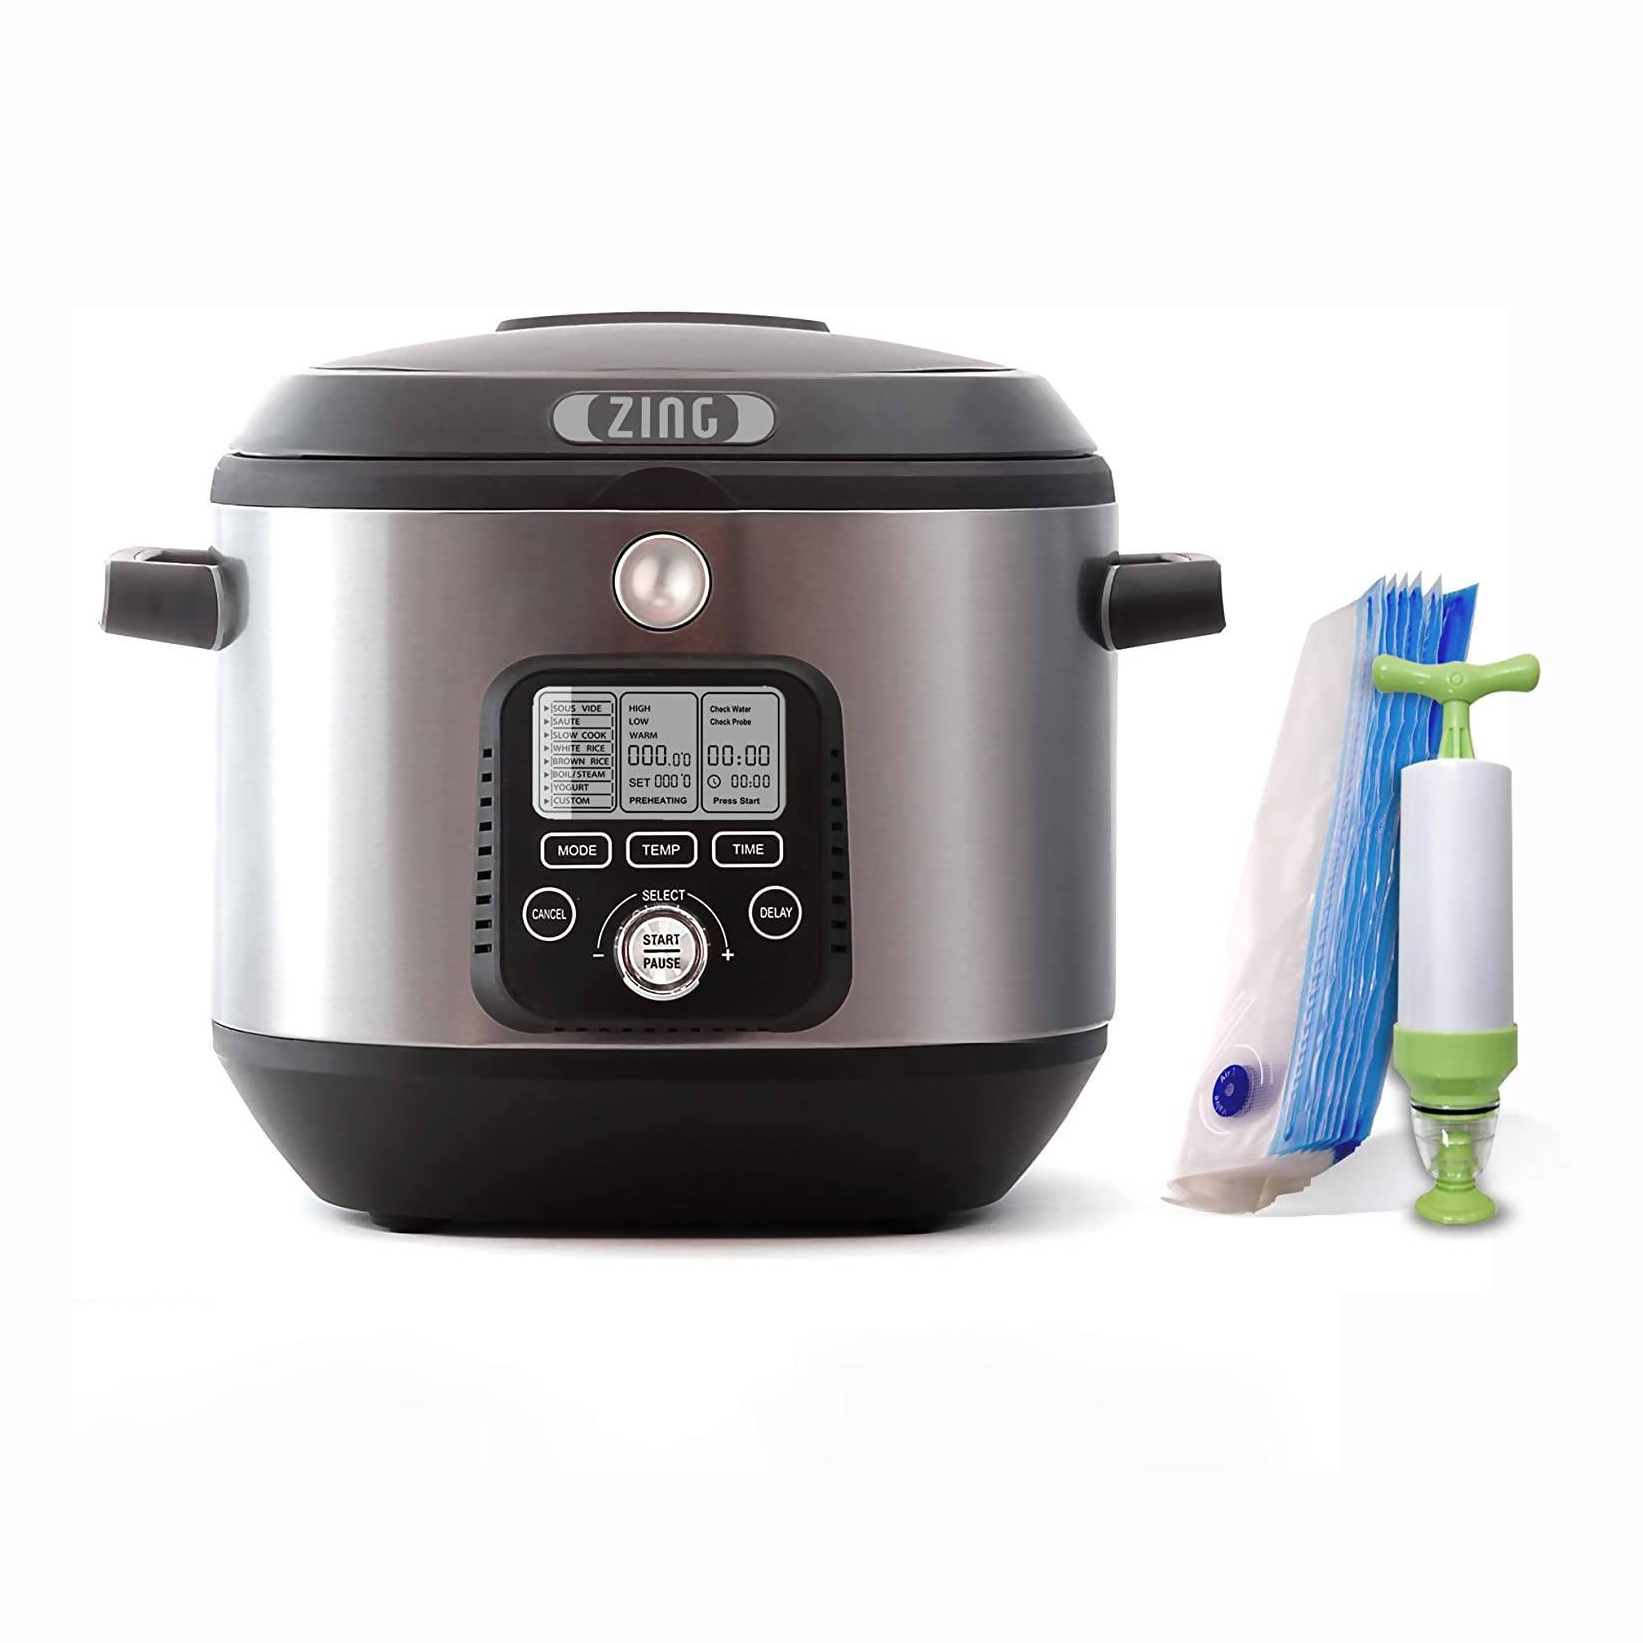 [Promotion] Zing Cook Multi-Cooker with Sous Vide & Slow Cooking Functions, 6 Qt